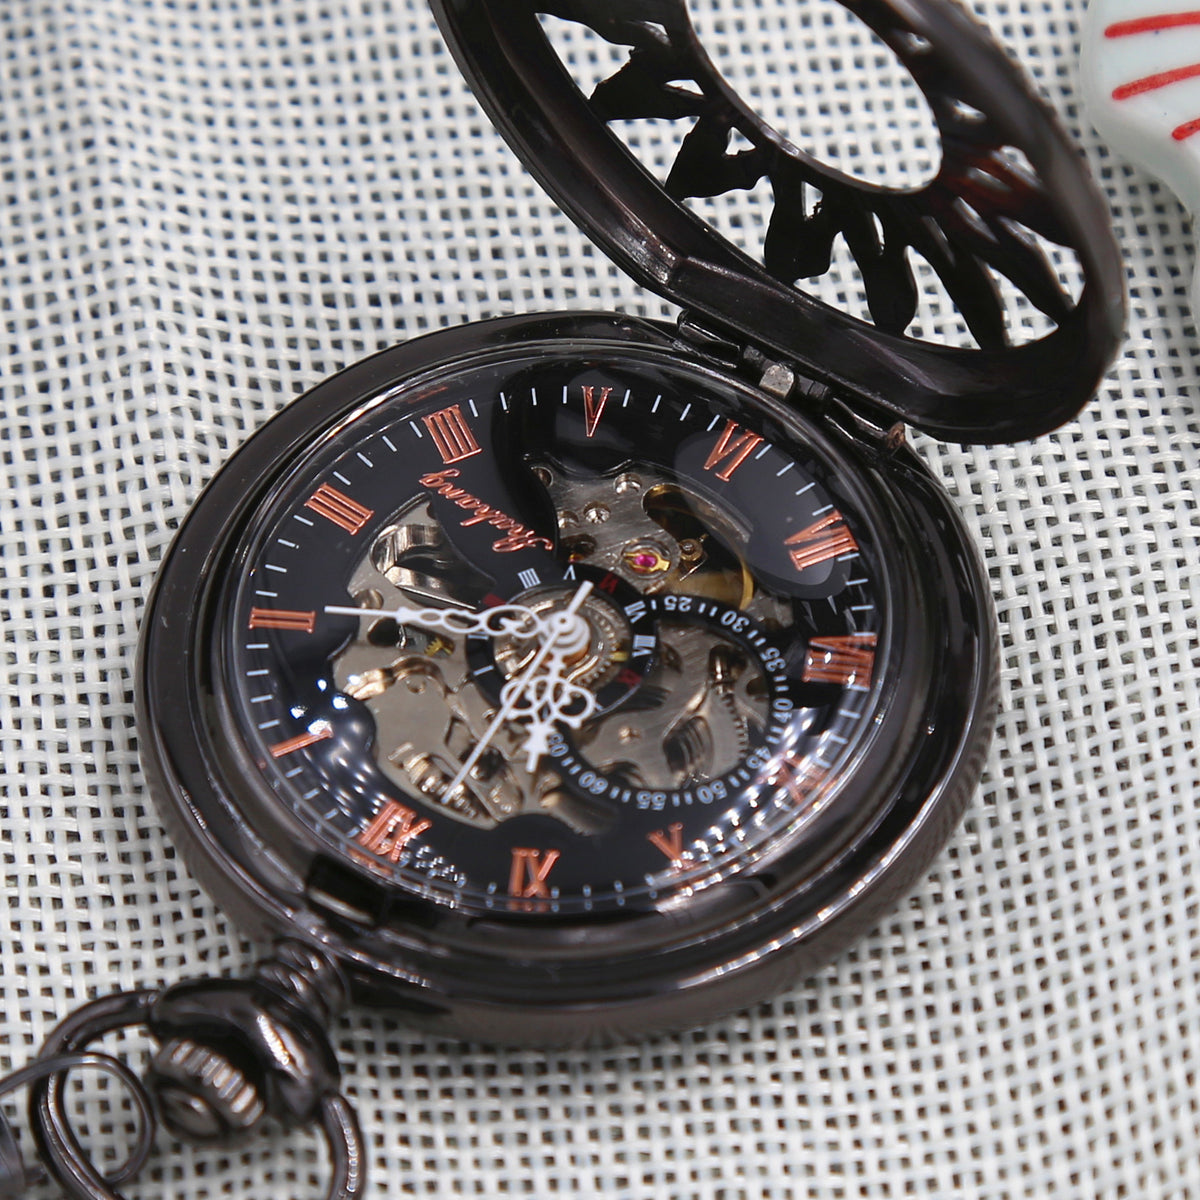 Mens Pocket Watch Personalized Engraveable Mechanical Pocketwatch with chain Sun Flames Gunmetal Black Groomsmen gift ideas VM008